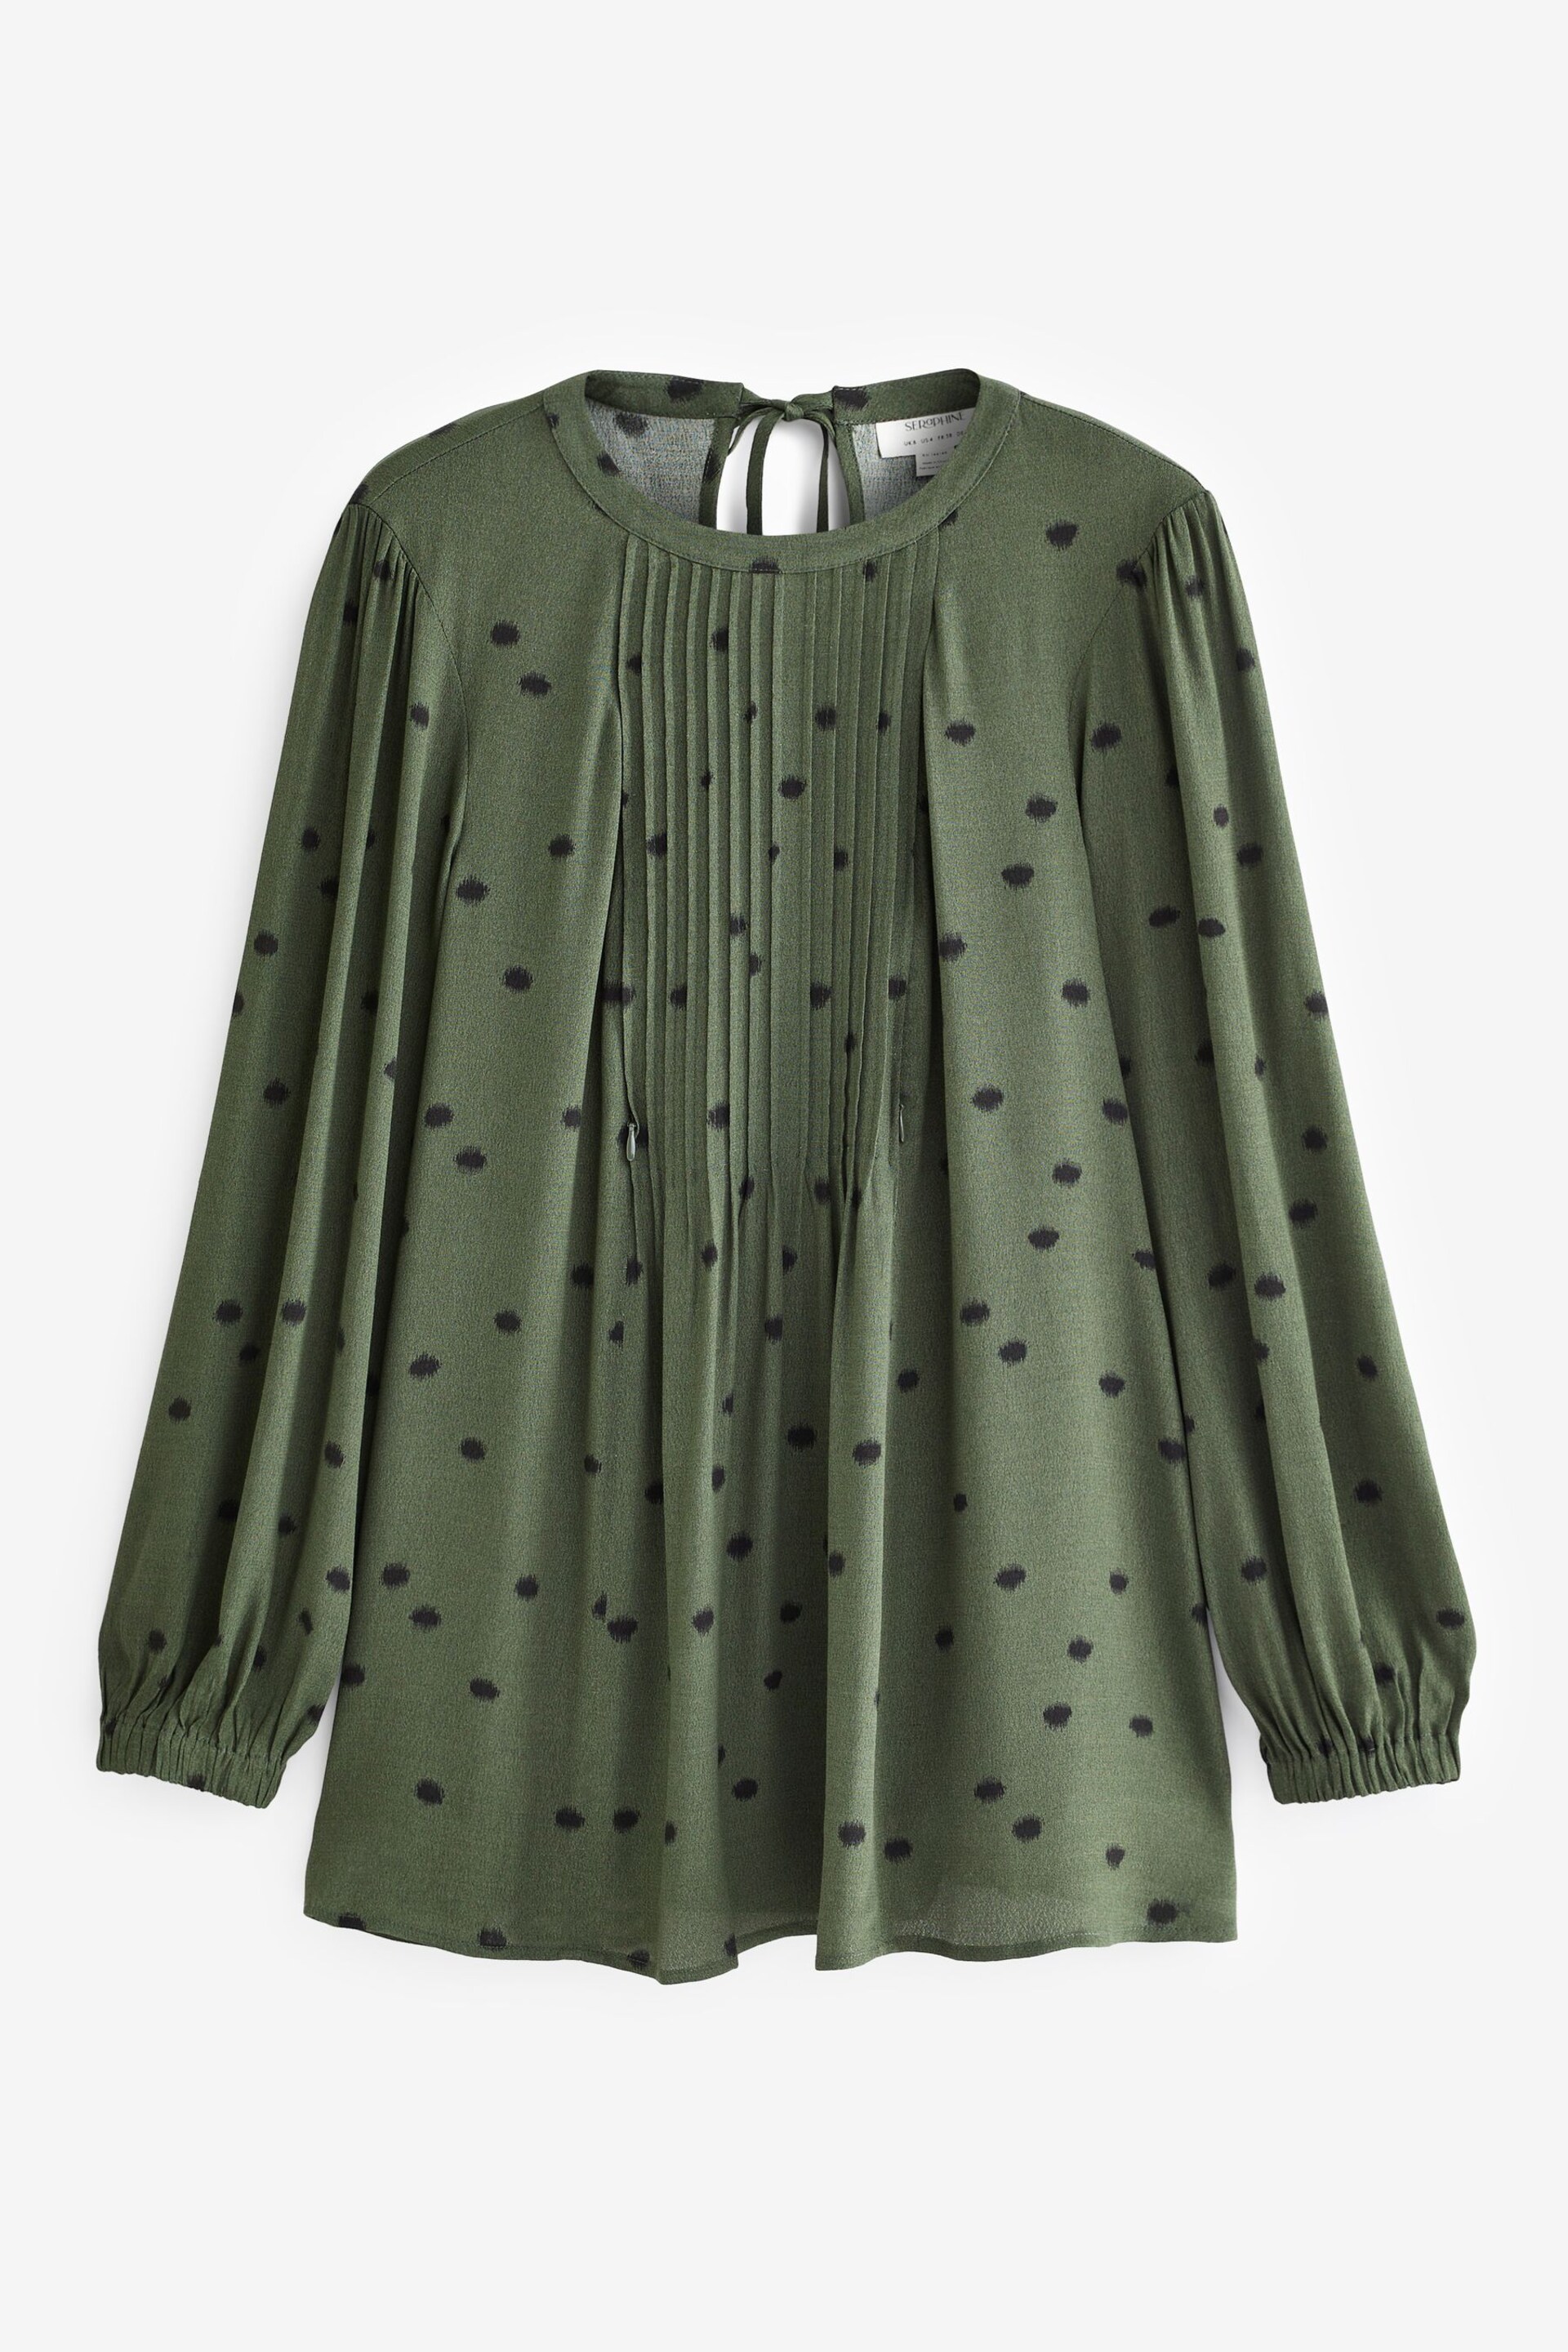 Seraphine Green Pintuck Top - Image 8 of 8